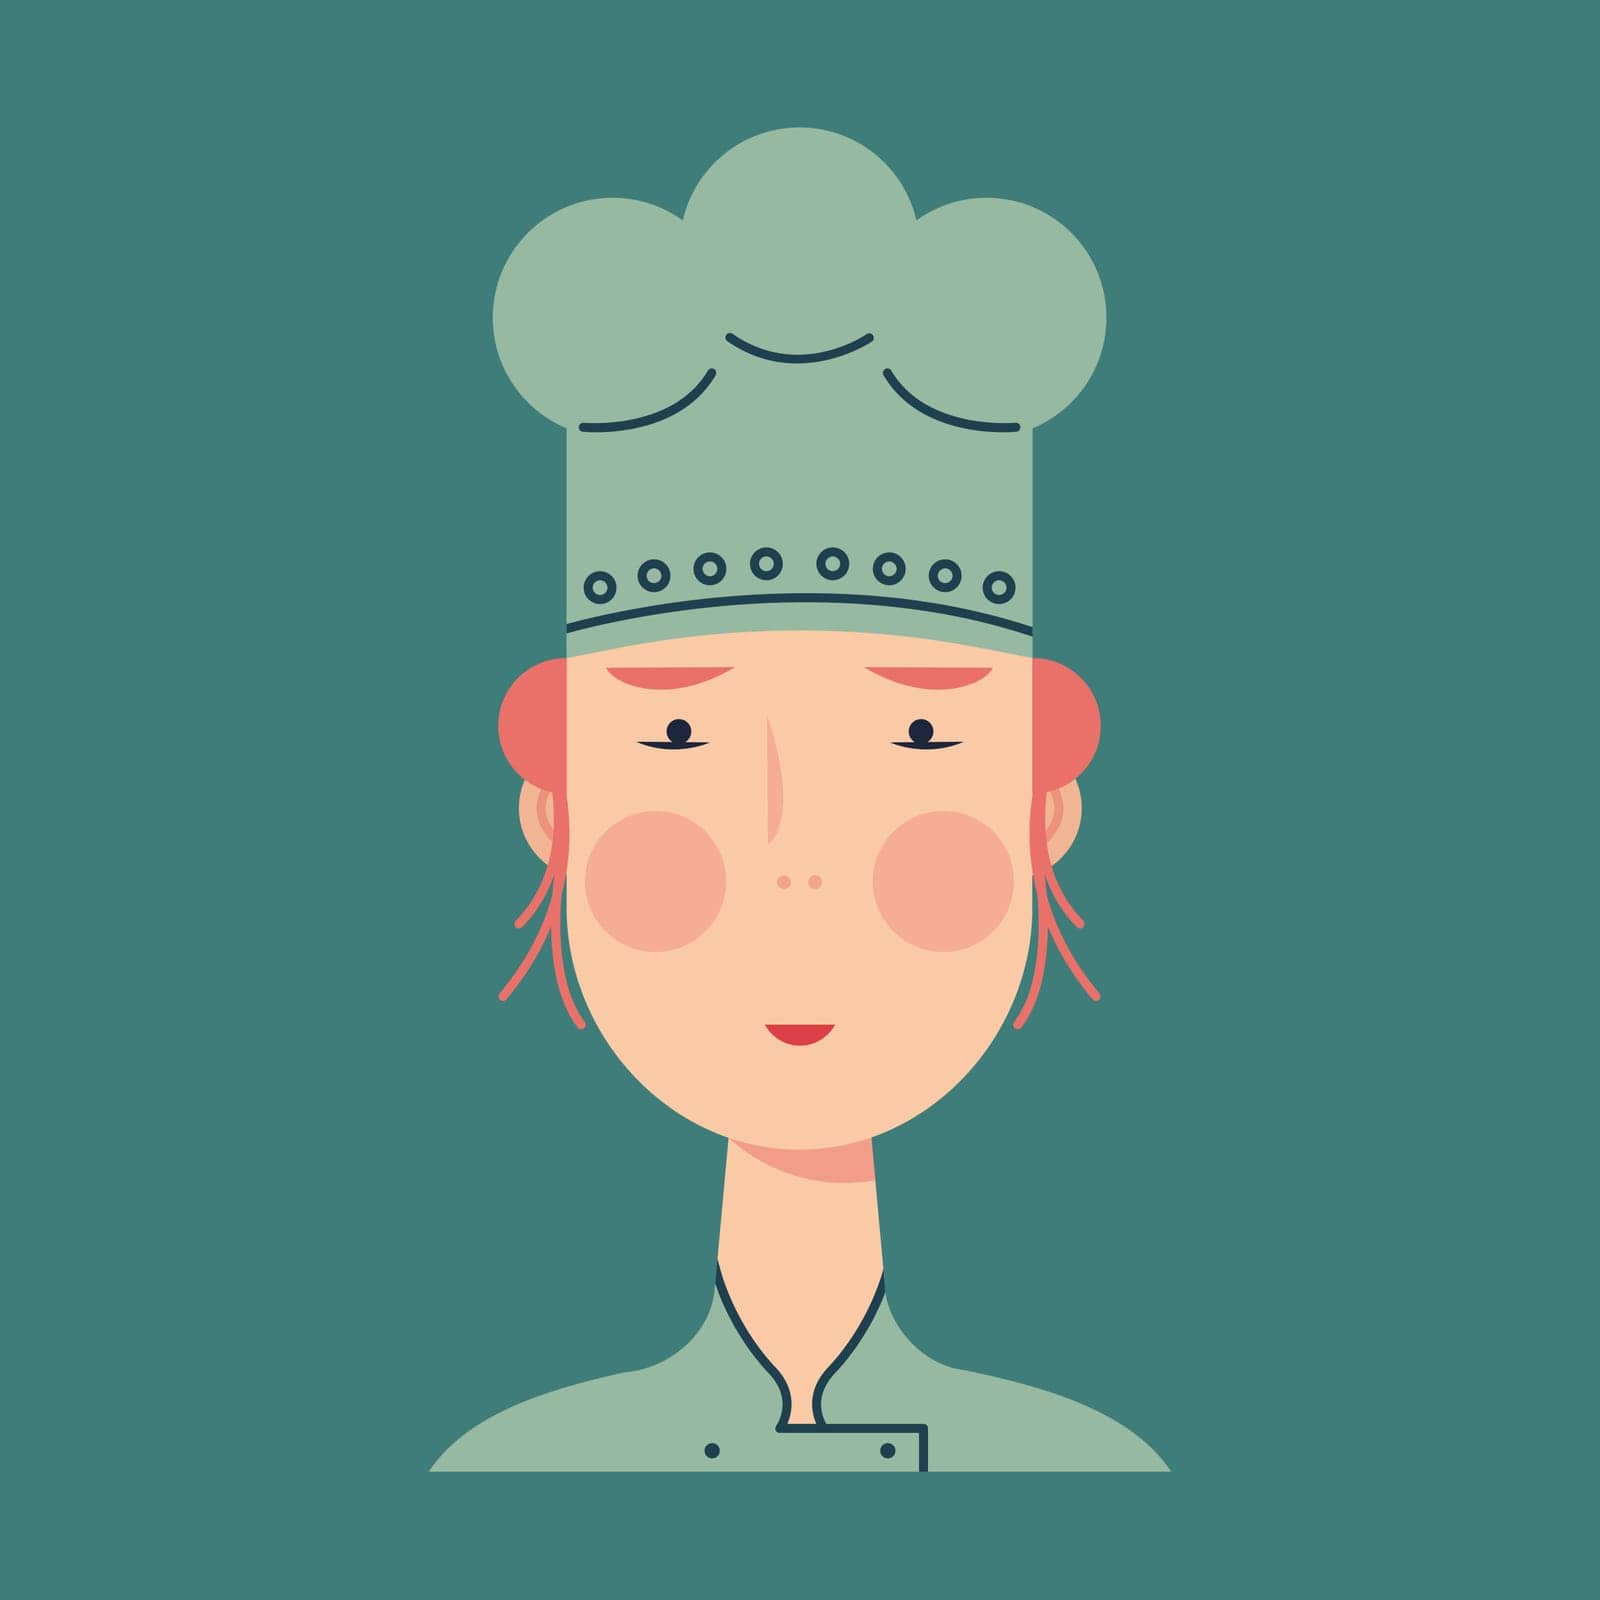 Avatar for one chef. Woman with ginger hair in chef's hat.